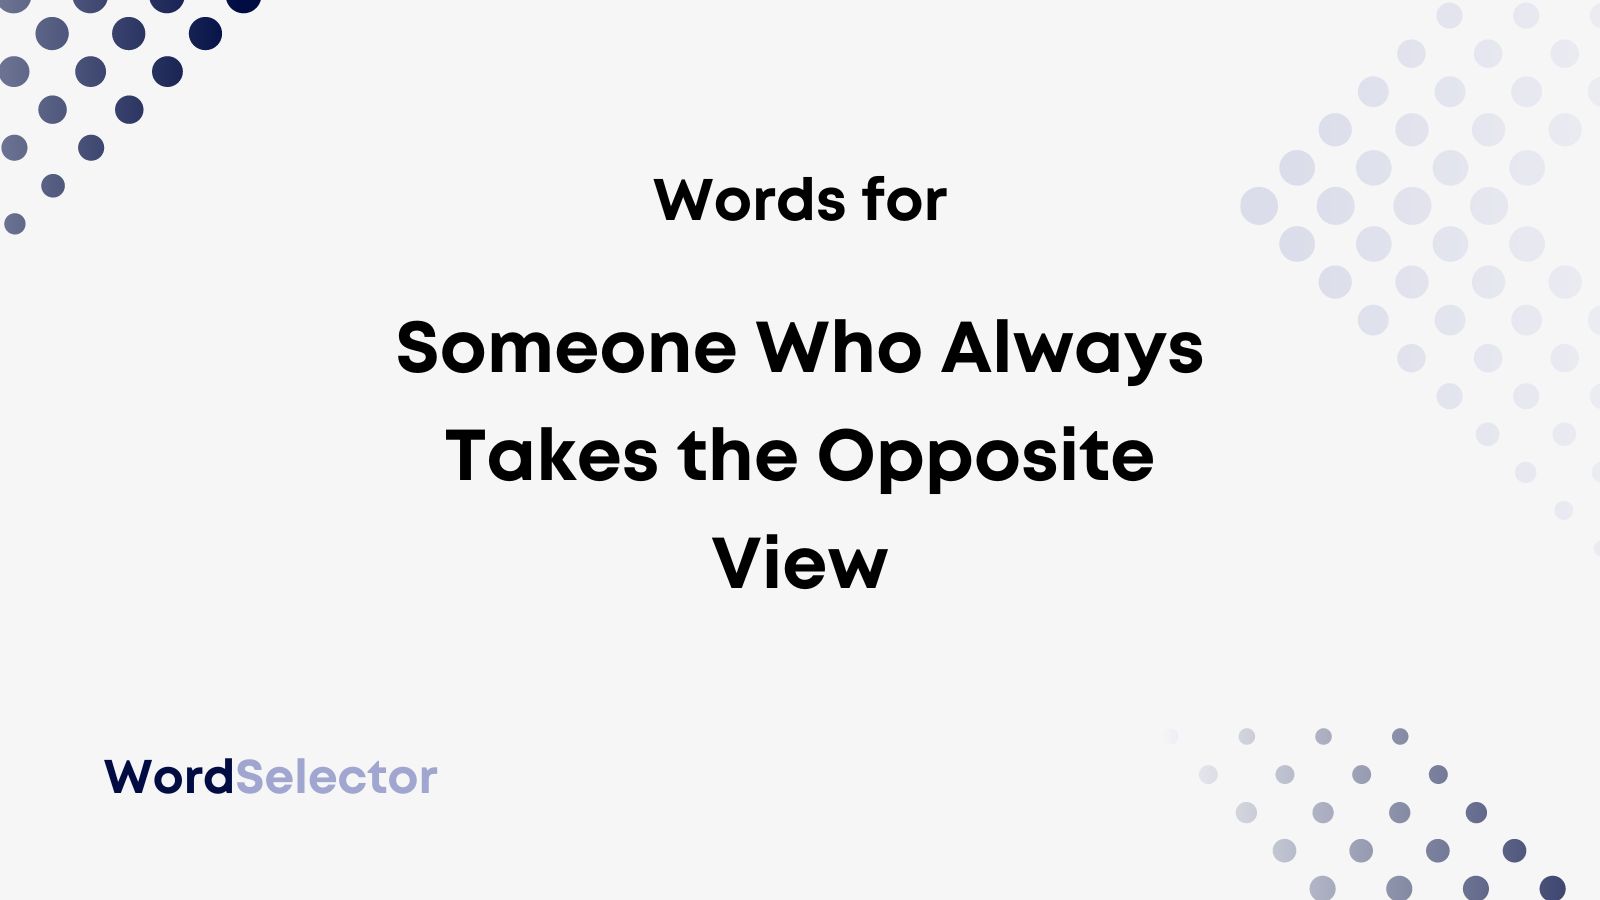 what-to-call-someone-who-always-takes-the-opposite-view-wordselector